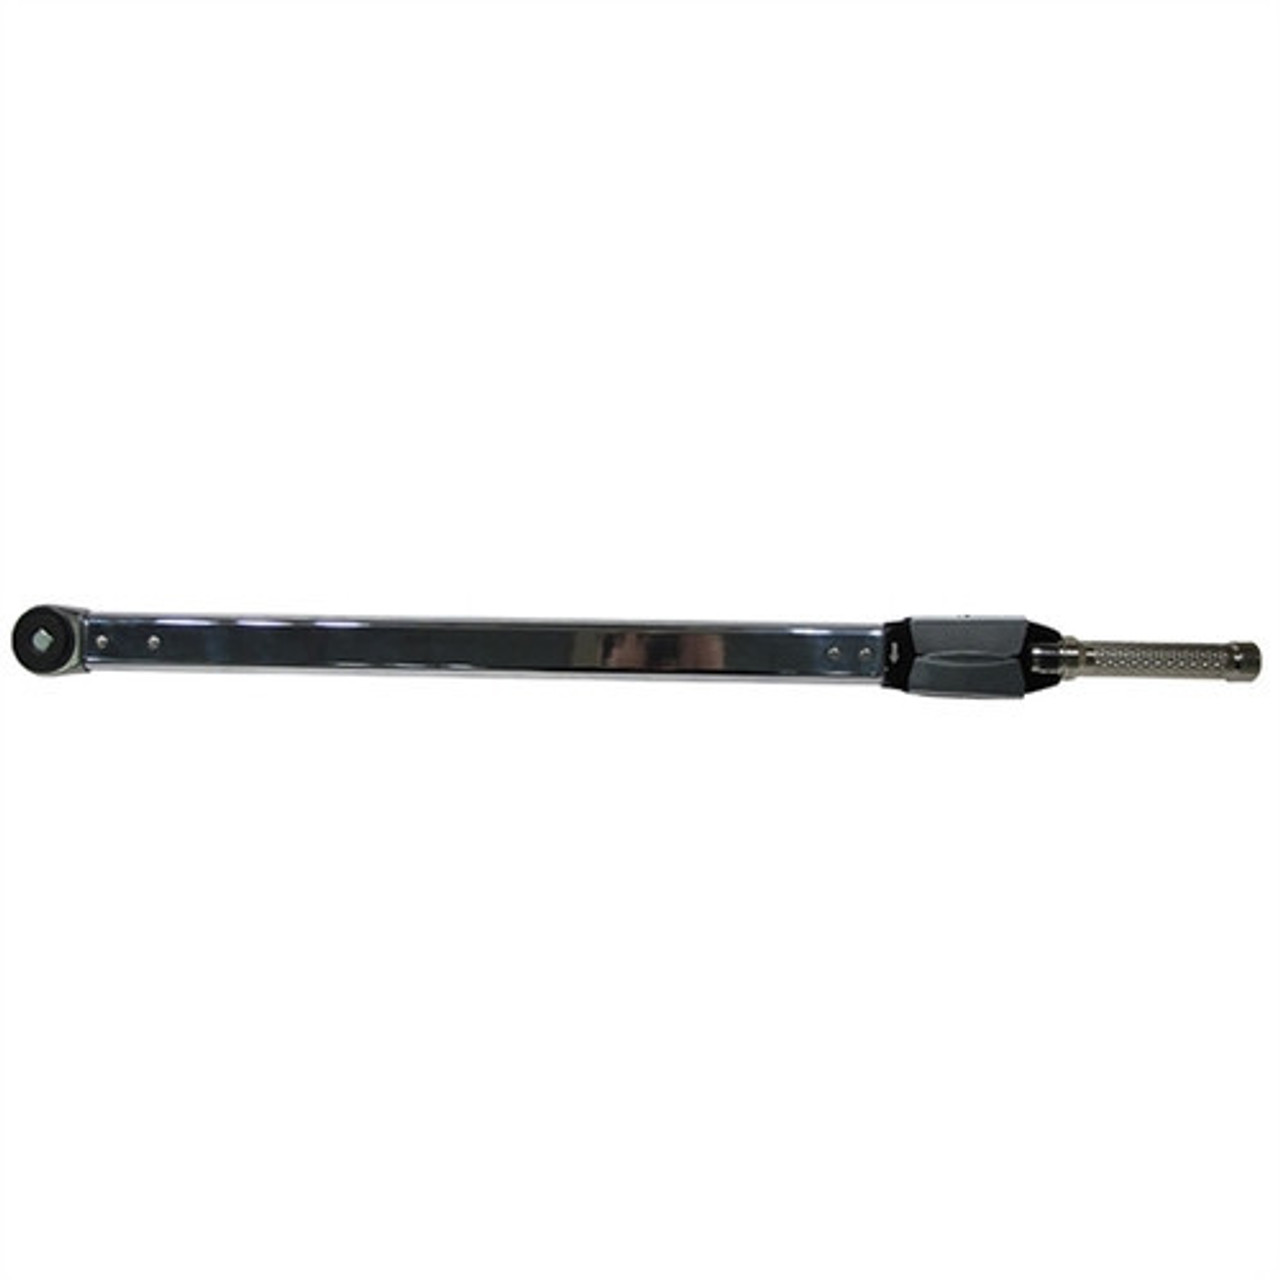 Norbar 1 Dr 150 - 600 ft lbs / 200 - 800 Nm Norbar Preset Torque Wrench - 14018